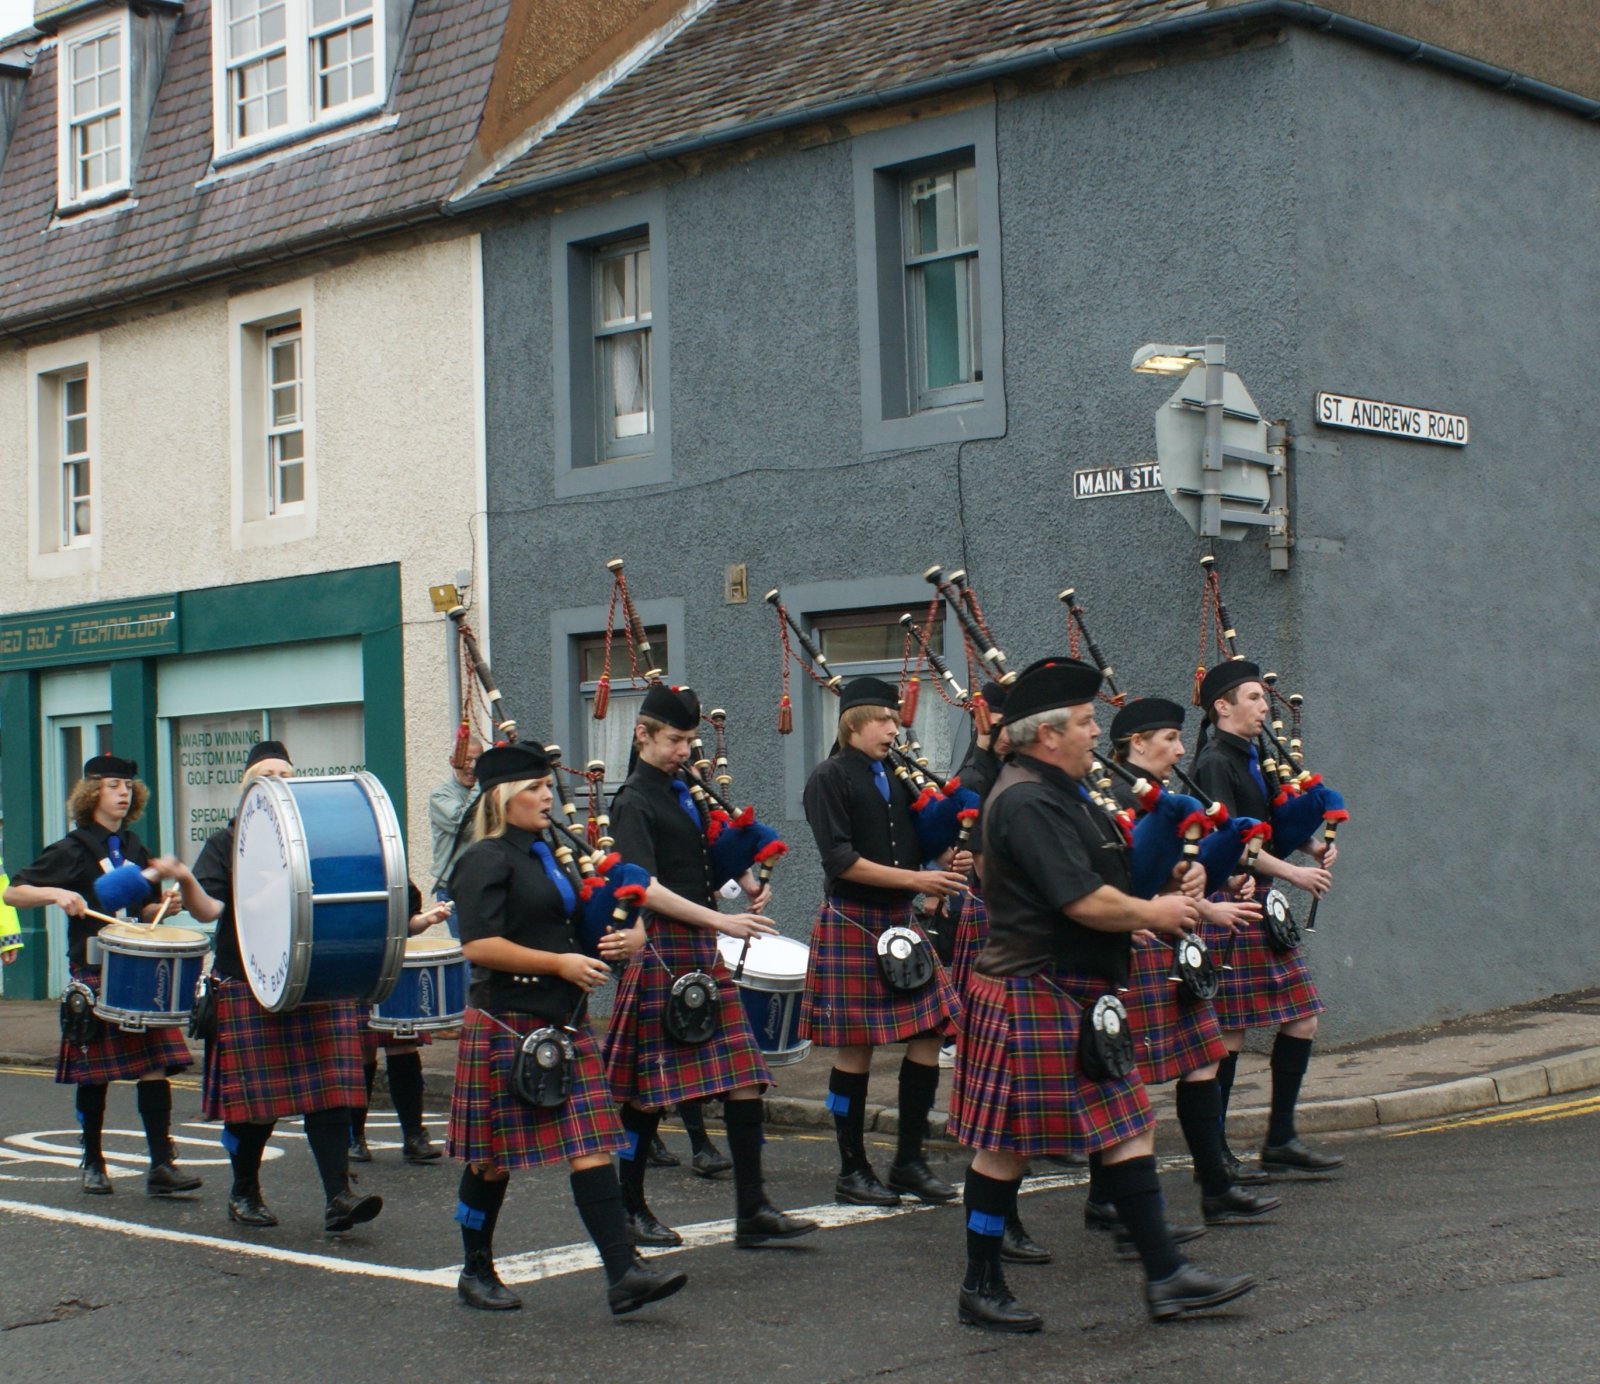 [Photograph+Methil+Pipe+Band+Ceres+Highland+Games+Fife+Scotland+03.jpg]